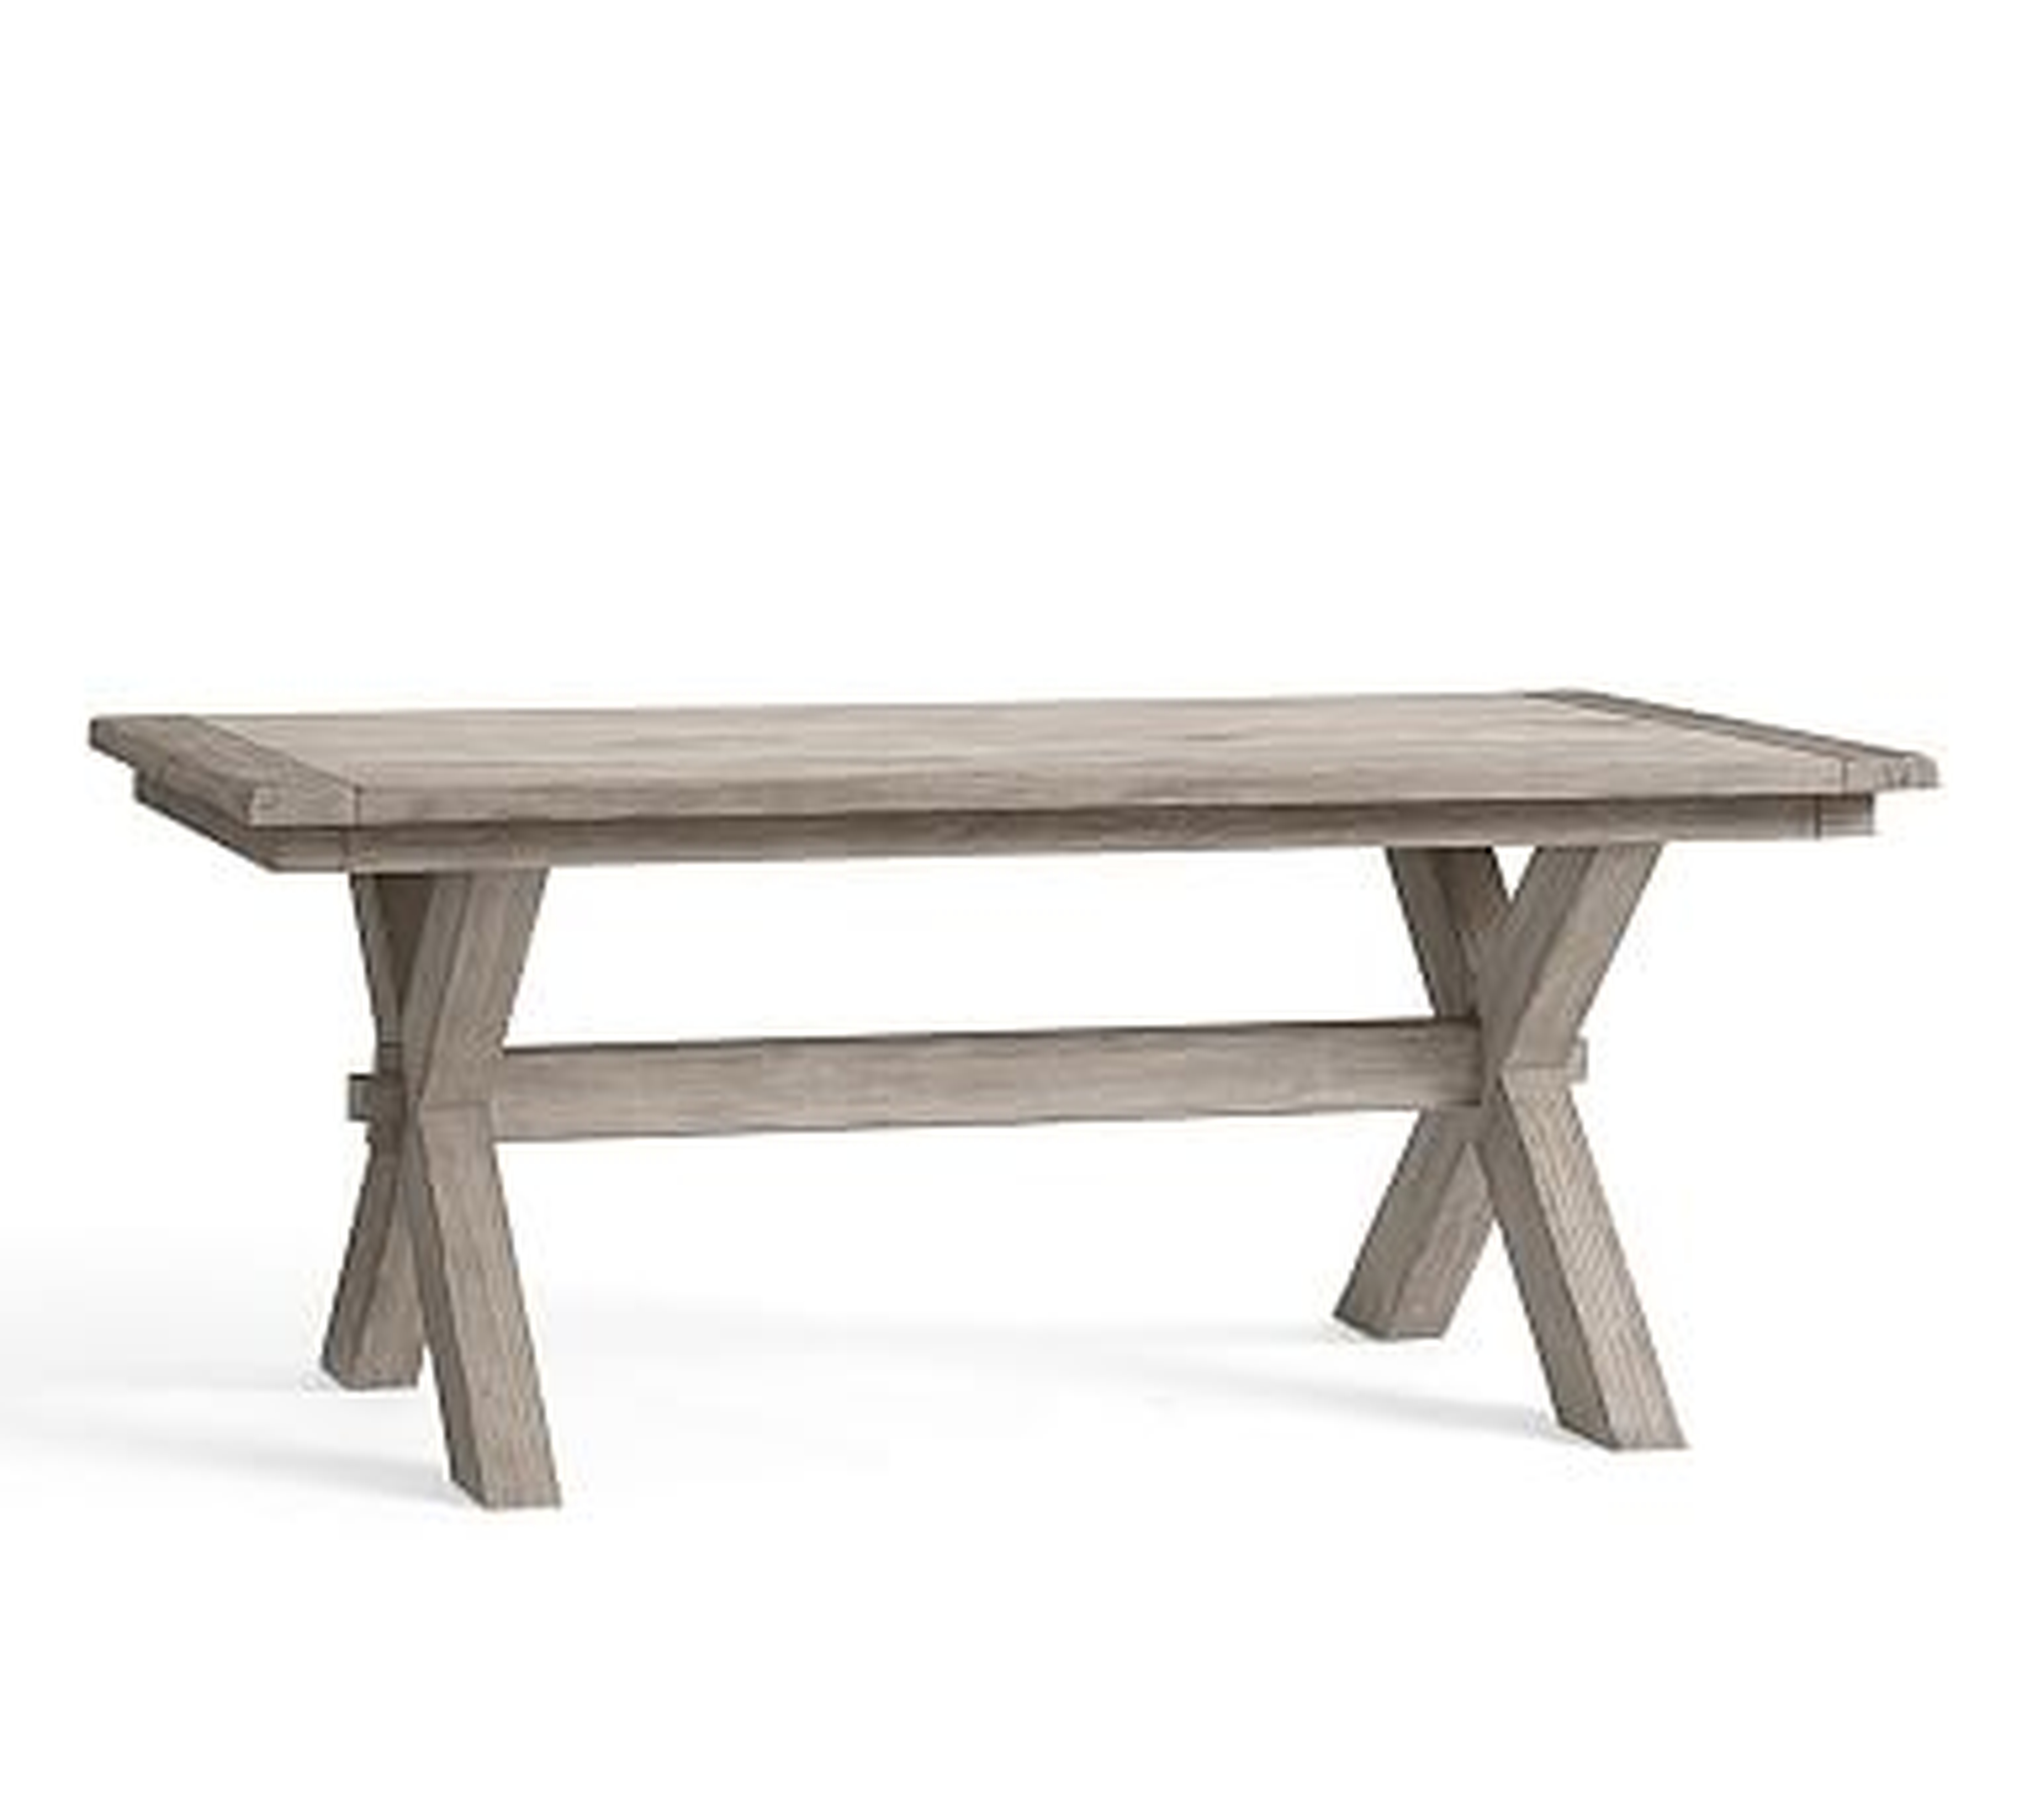 Toscana Extending Dining Table, Gray Wash, 88.5" - 124.5" L - Pottery Barn